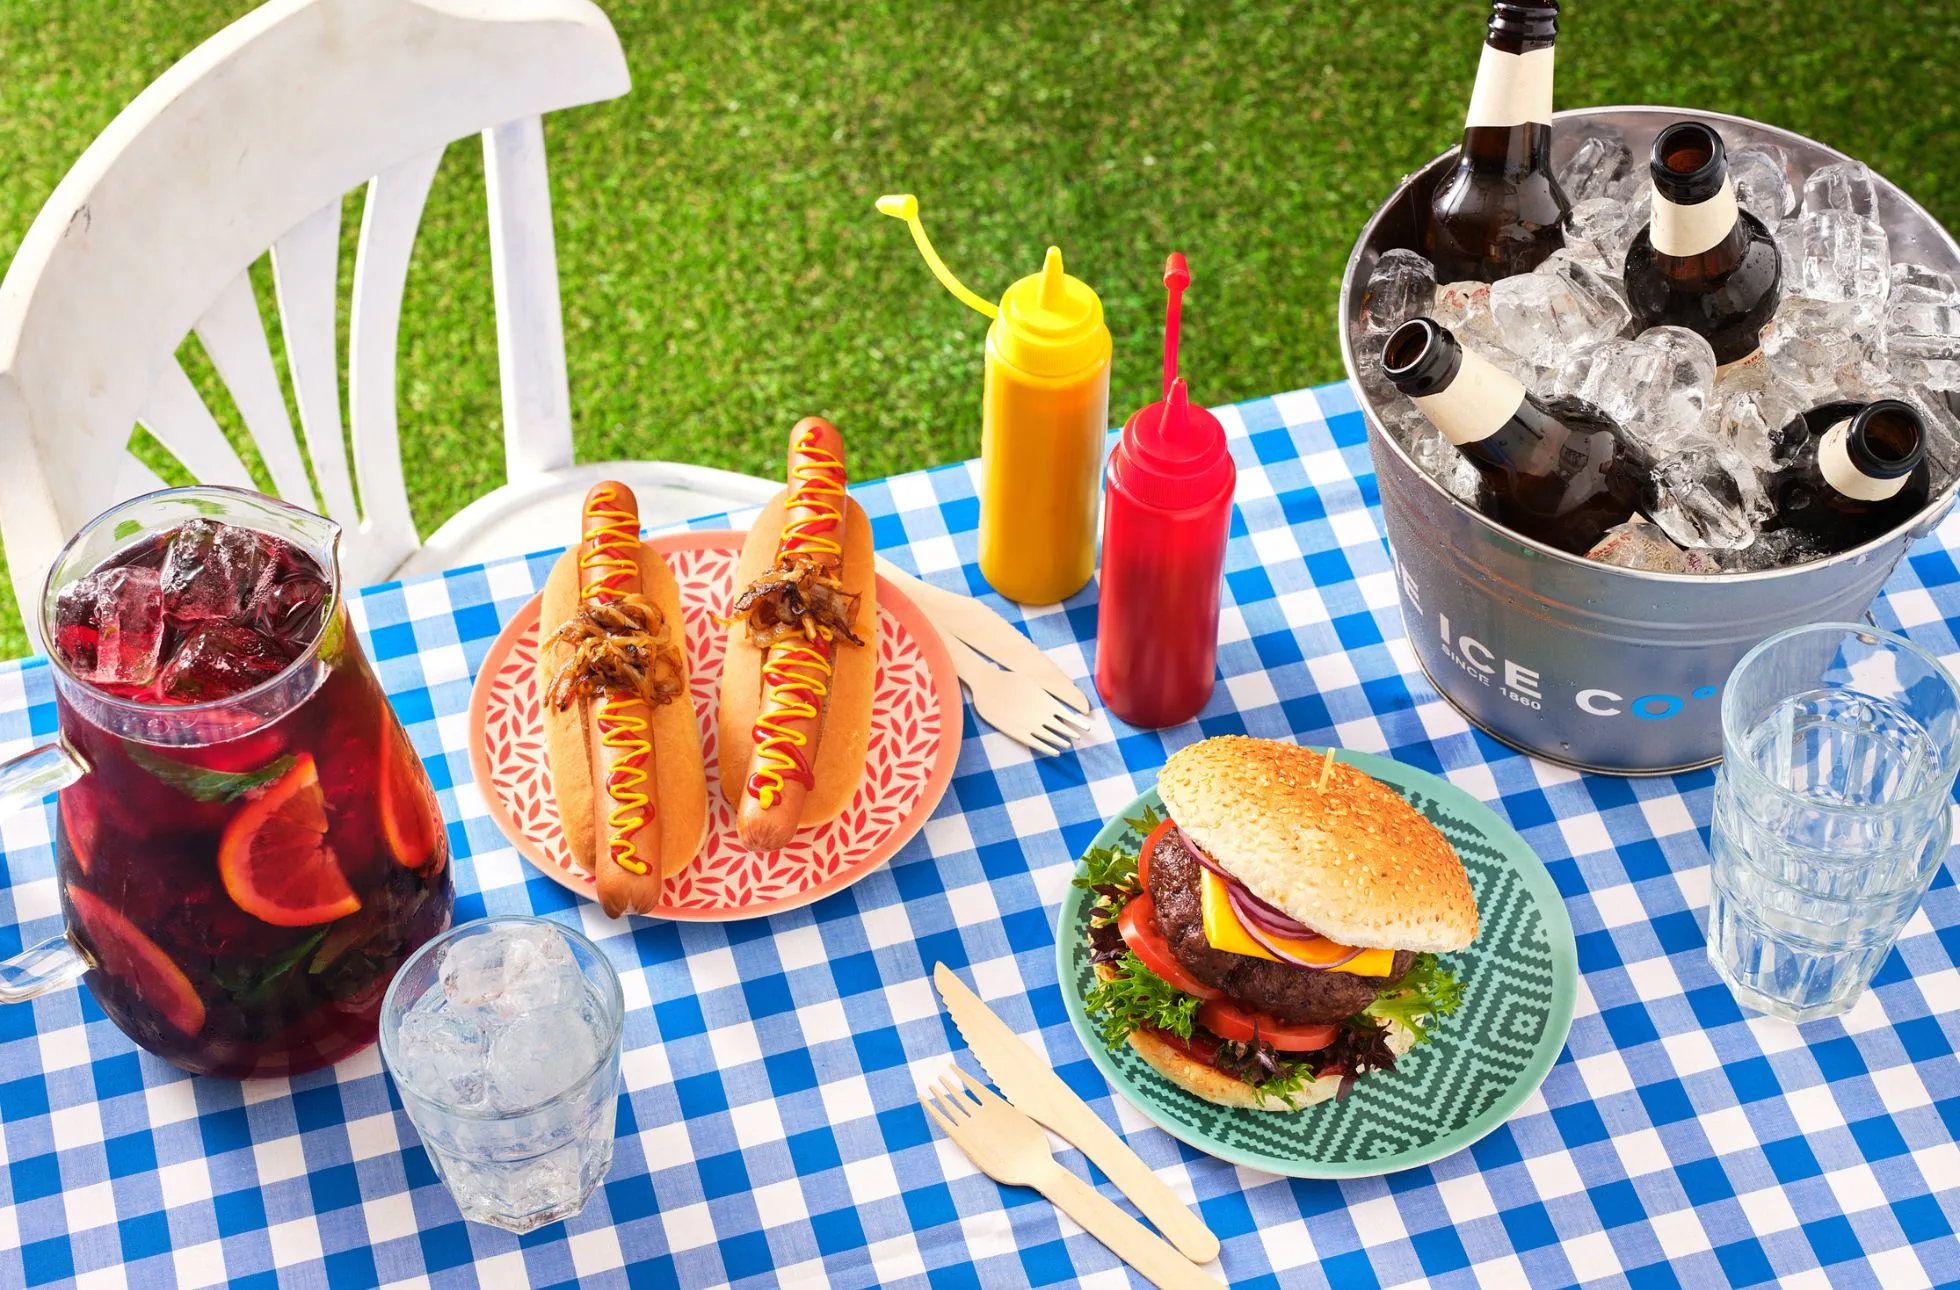 bottles of beer chilling in an ice bucket, next to bbq food and a jug of sangria